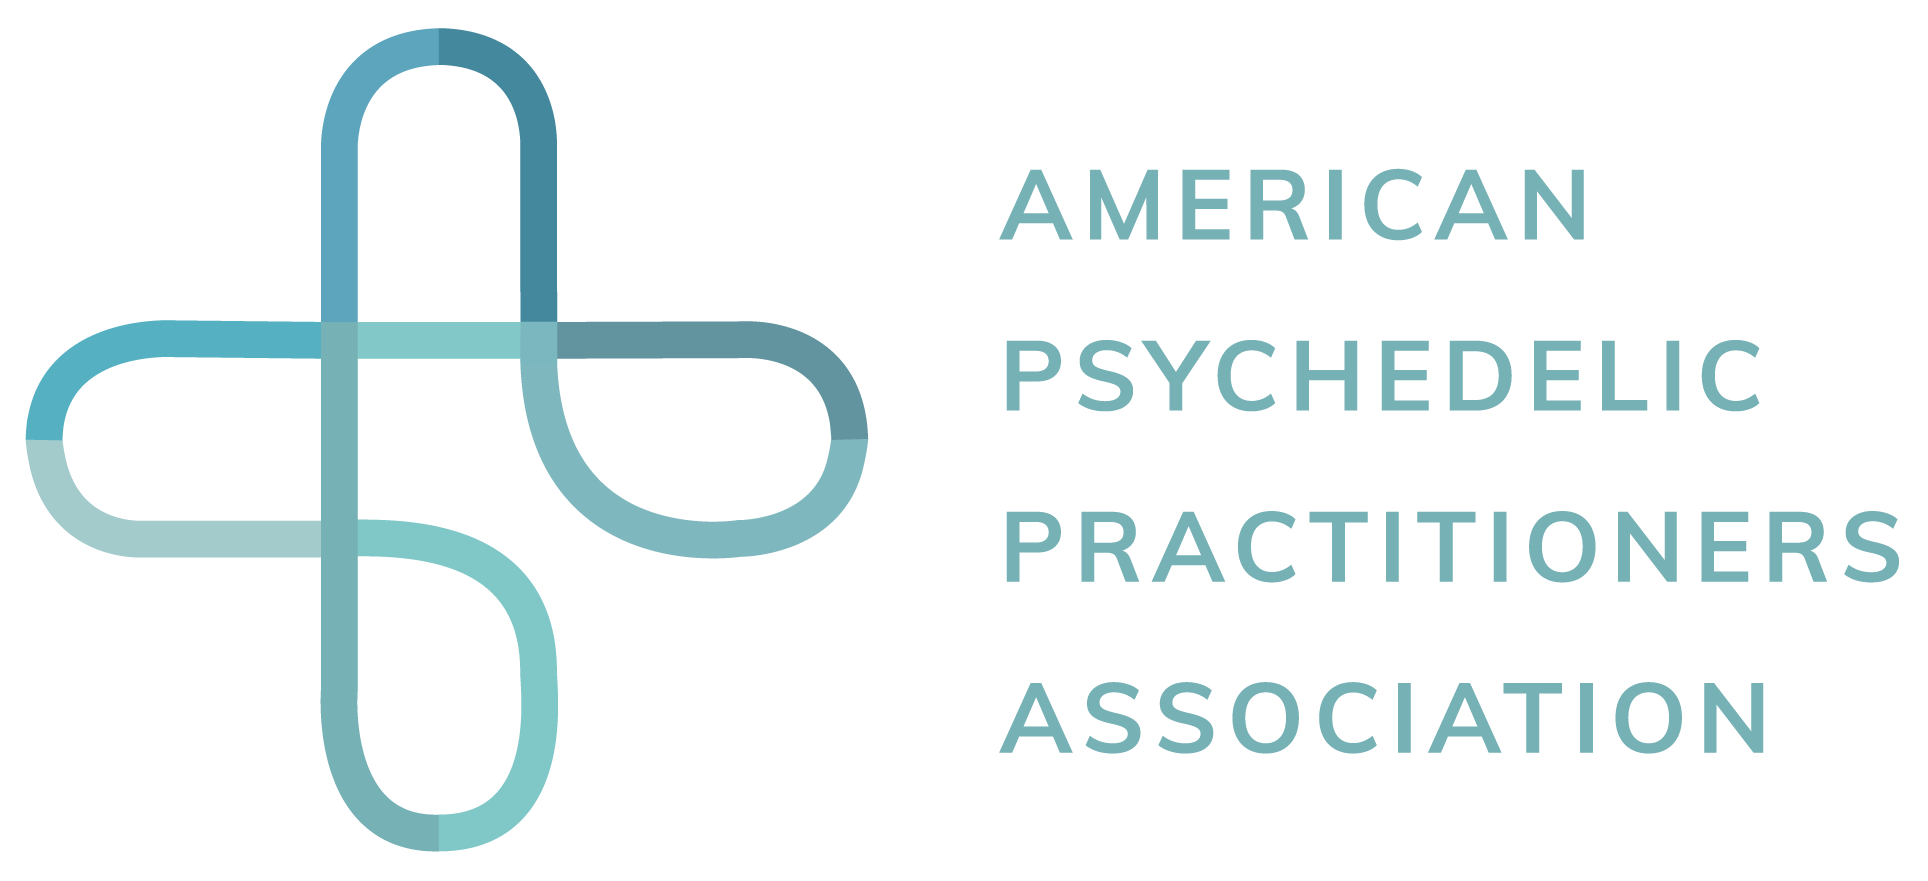 American Psychedelic Practitioners Association Community